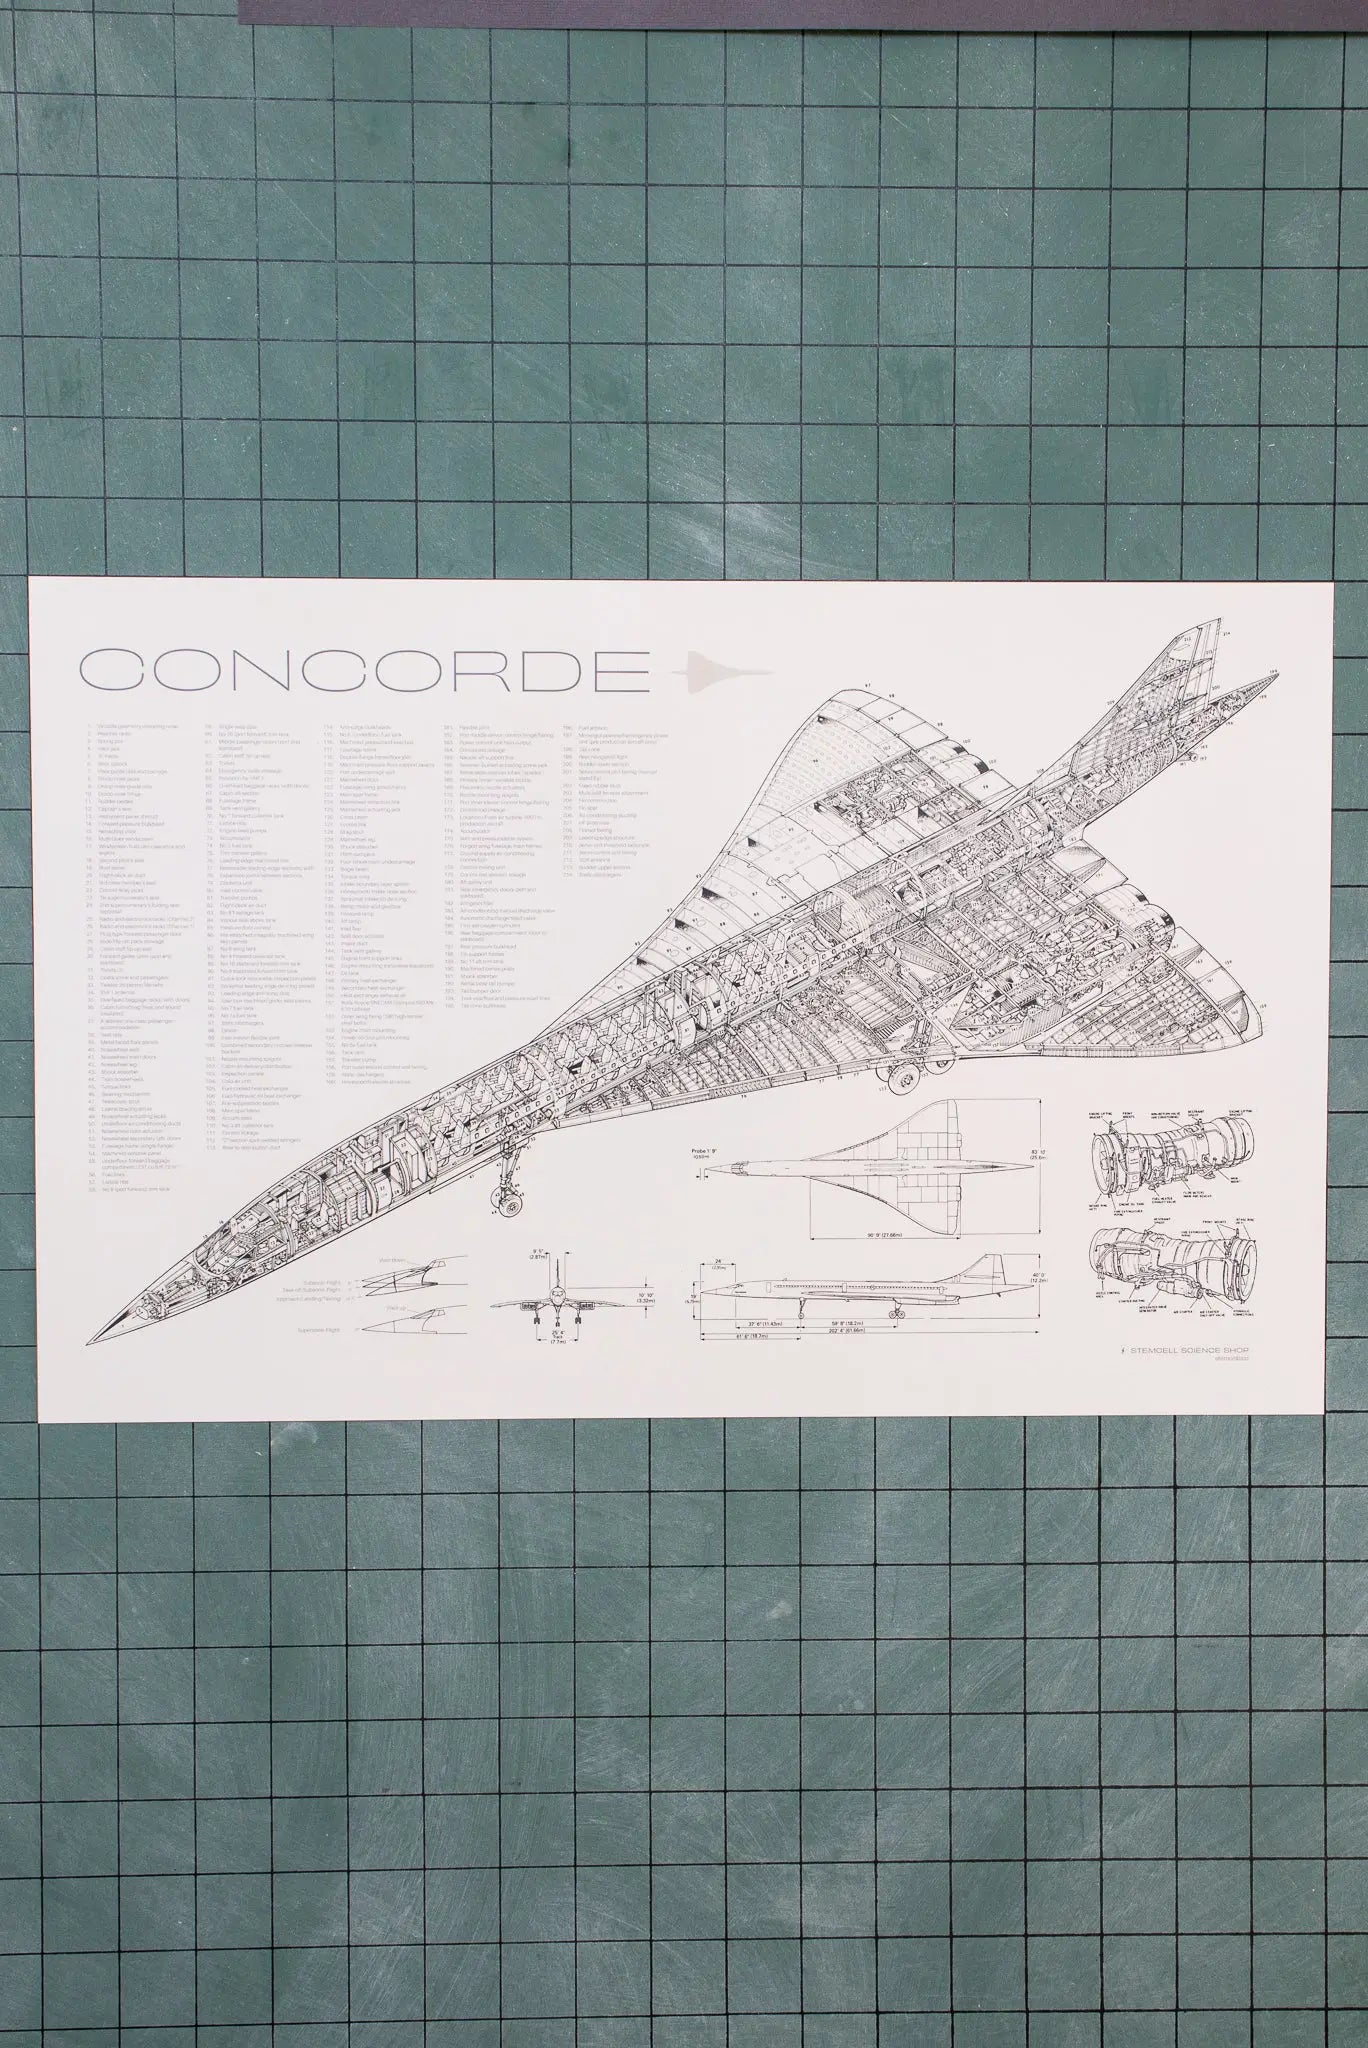 Concorde Supersonic Airliner Schematic - Stemcell Science Shop